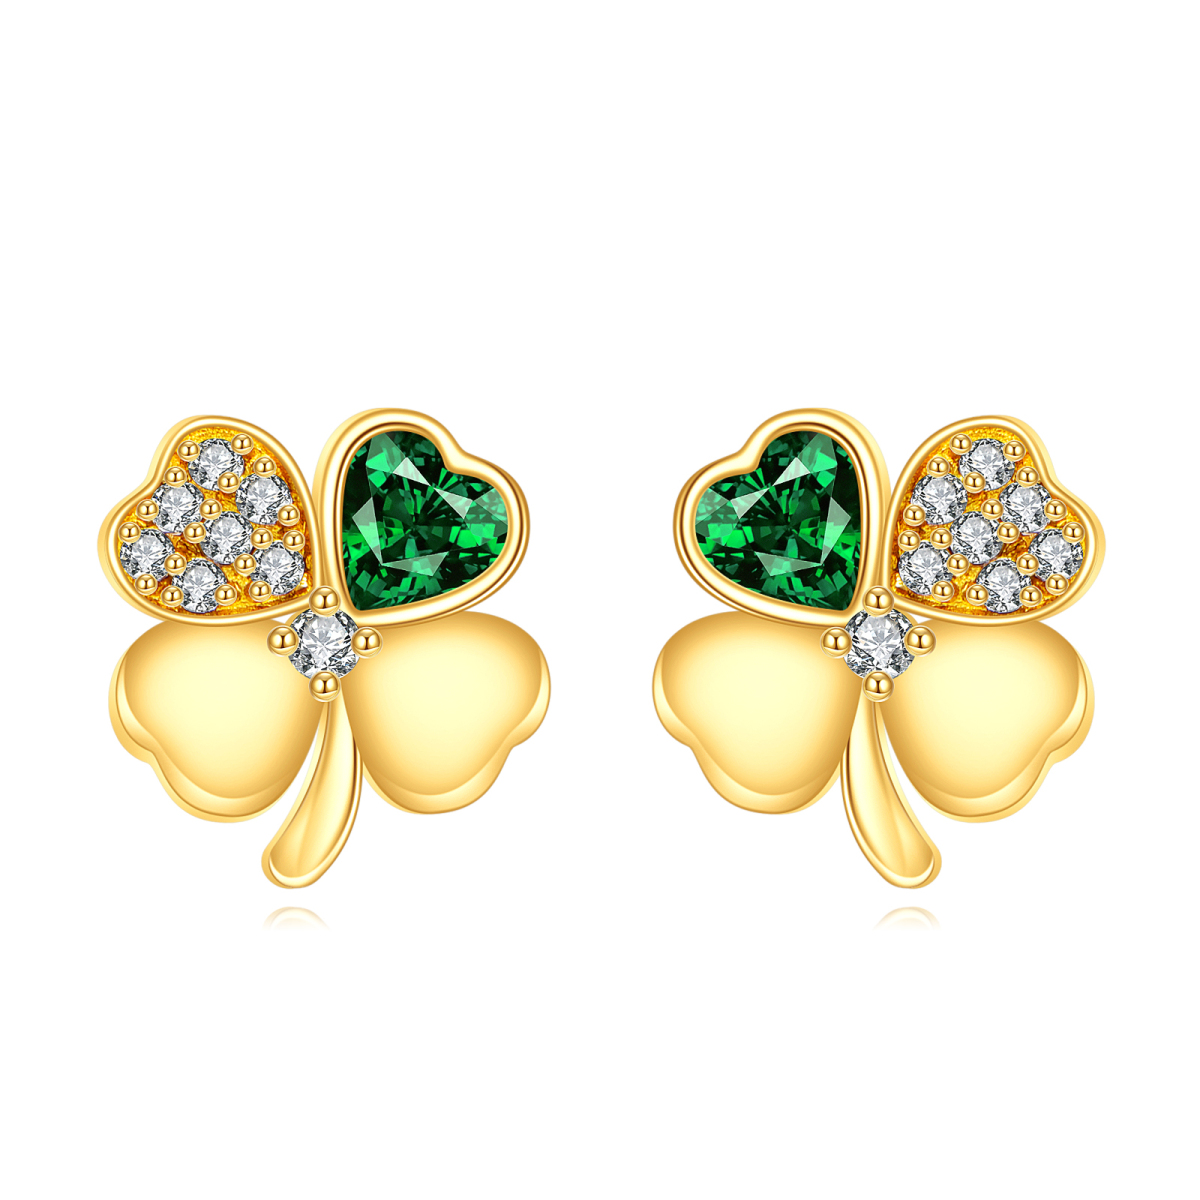 14K Gold Circular Shaped & Heart Shaped Cubic Zirconia Four Leaf Clover Stud Earrings-1